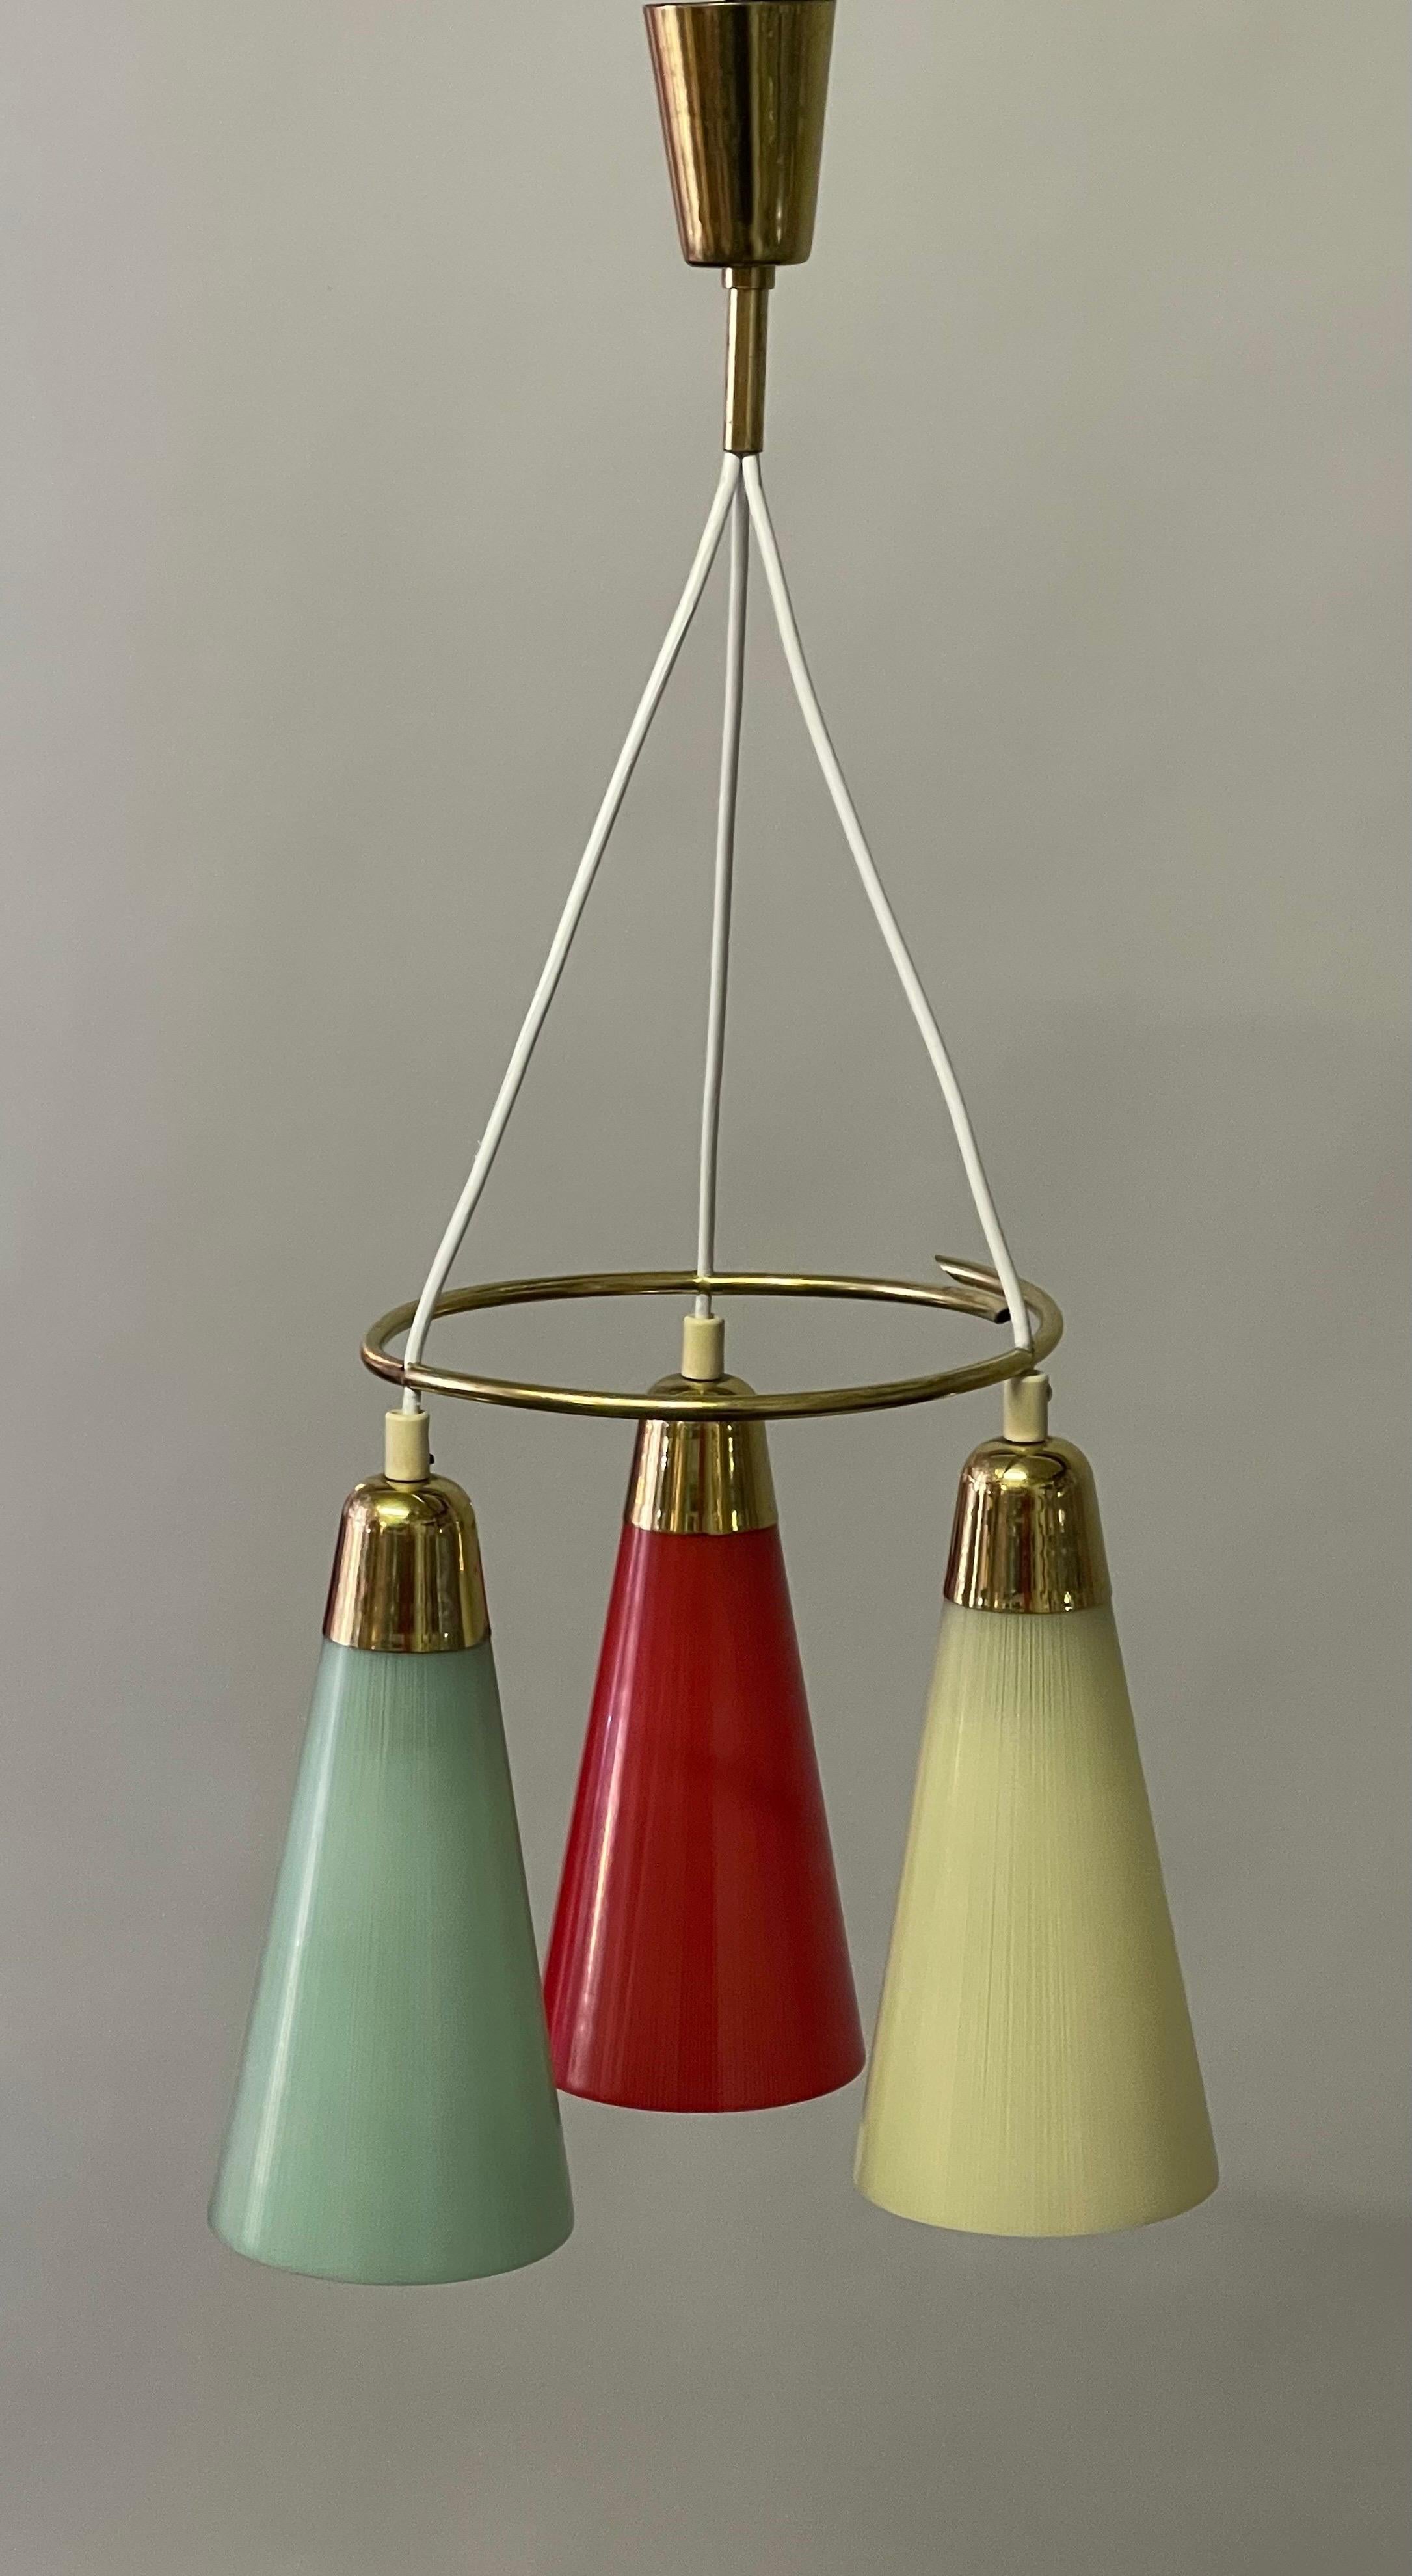 Mid-Century Modern Stilnovo Style Polished Brass and Multicolor Glass Pendant, circa 1950s For Sale